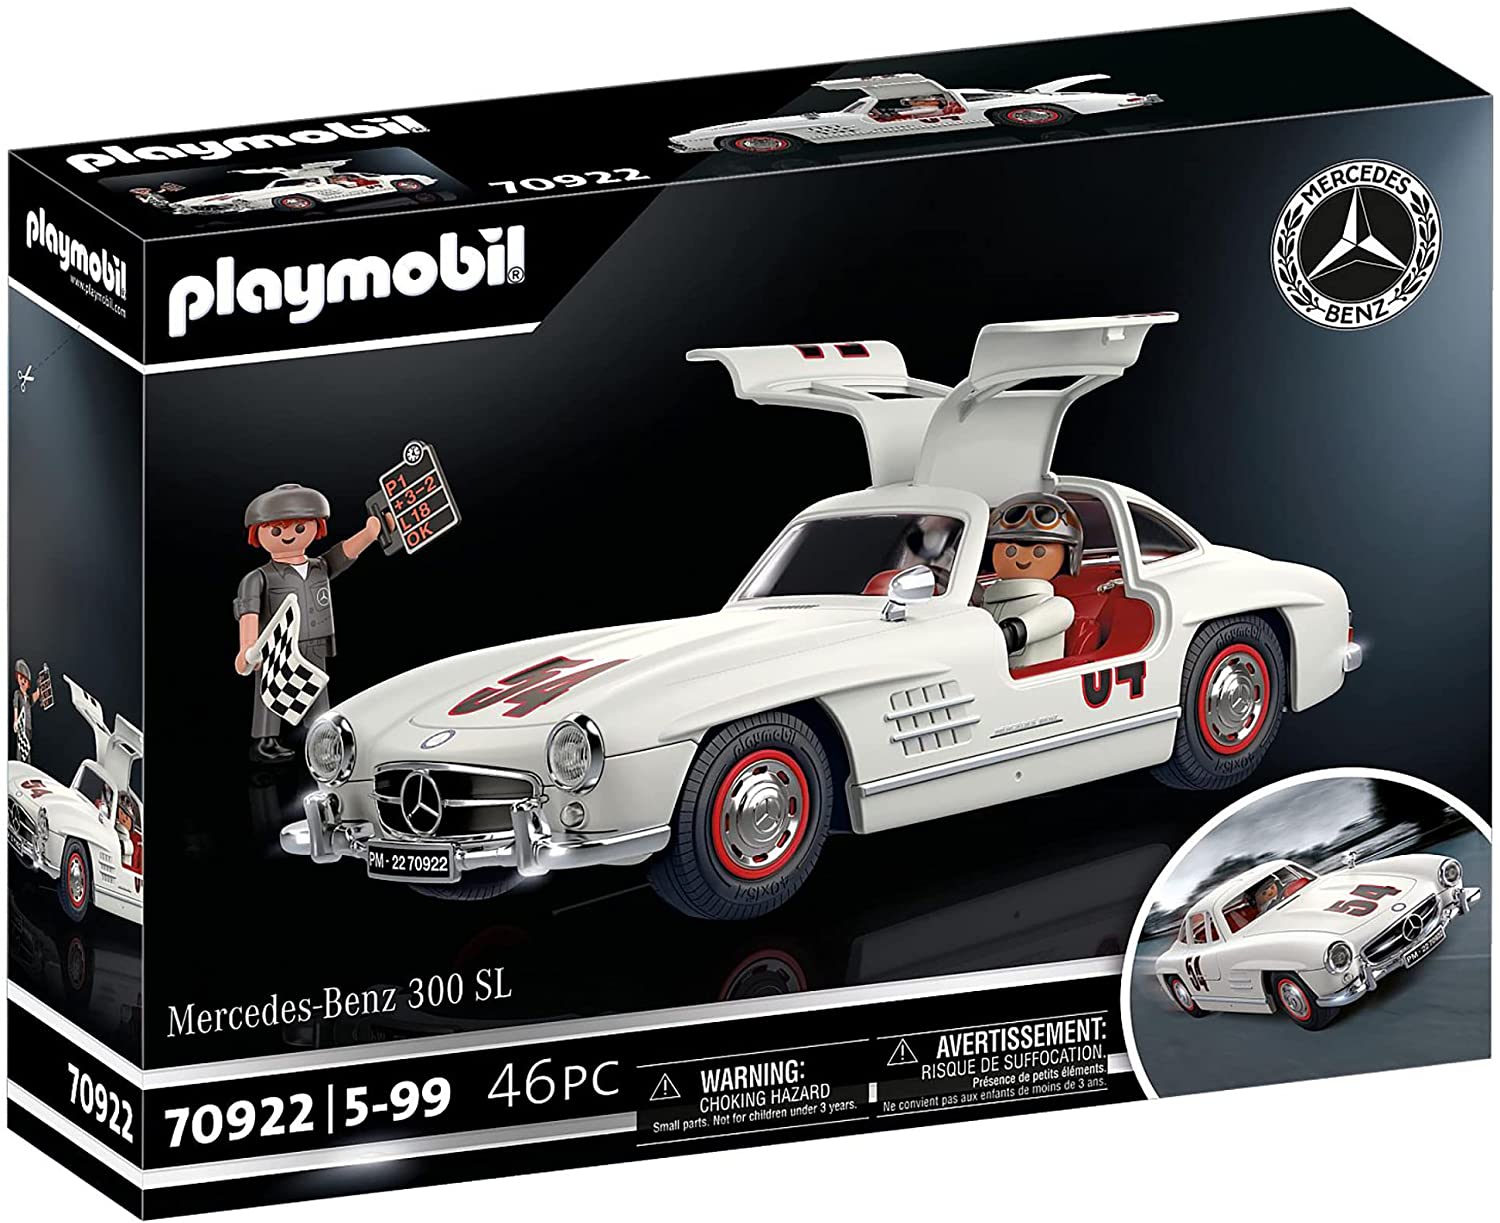 PLAYMOBIL 70922 Mercedes-Benz 300 SL, Model Car for Adults and Toy Car for 